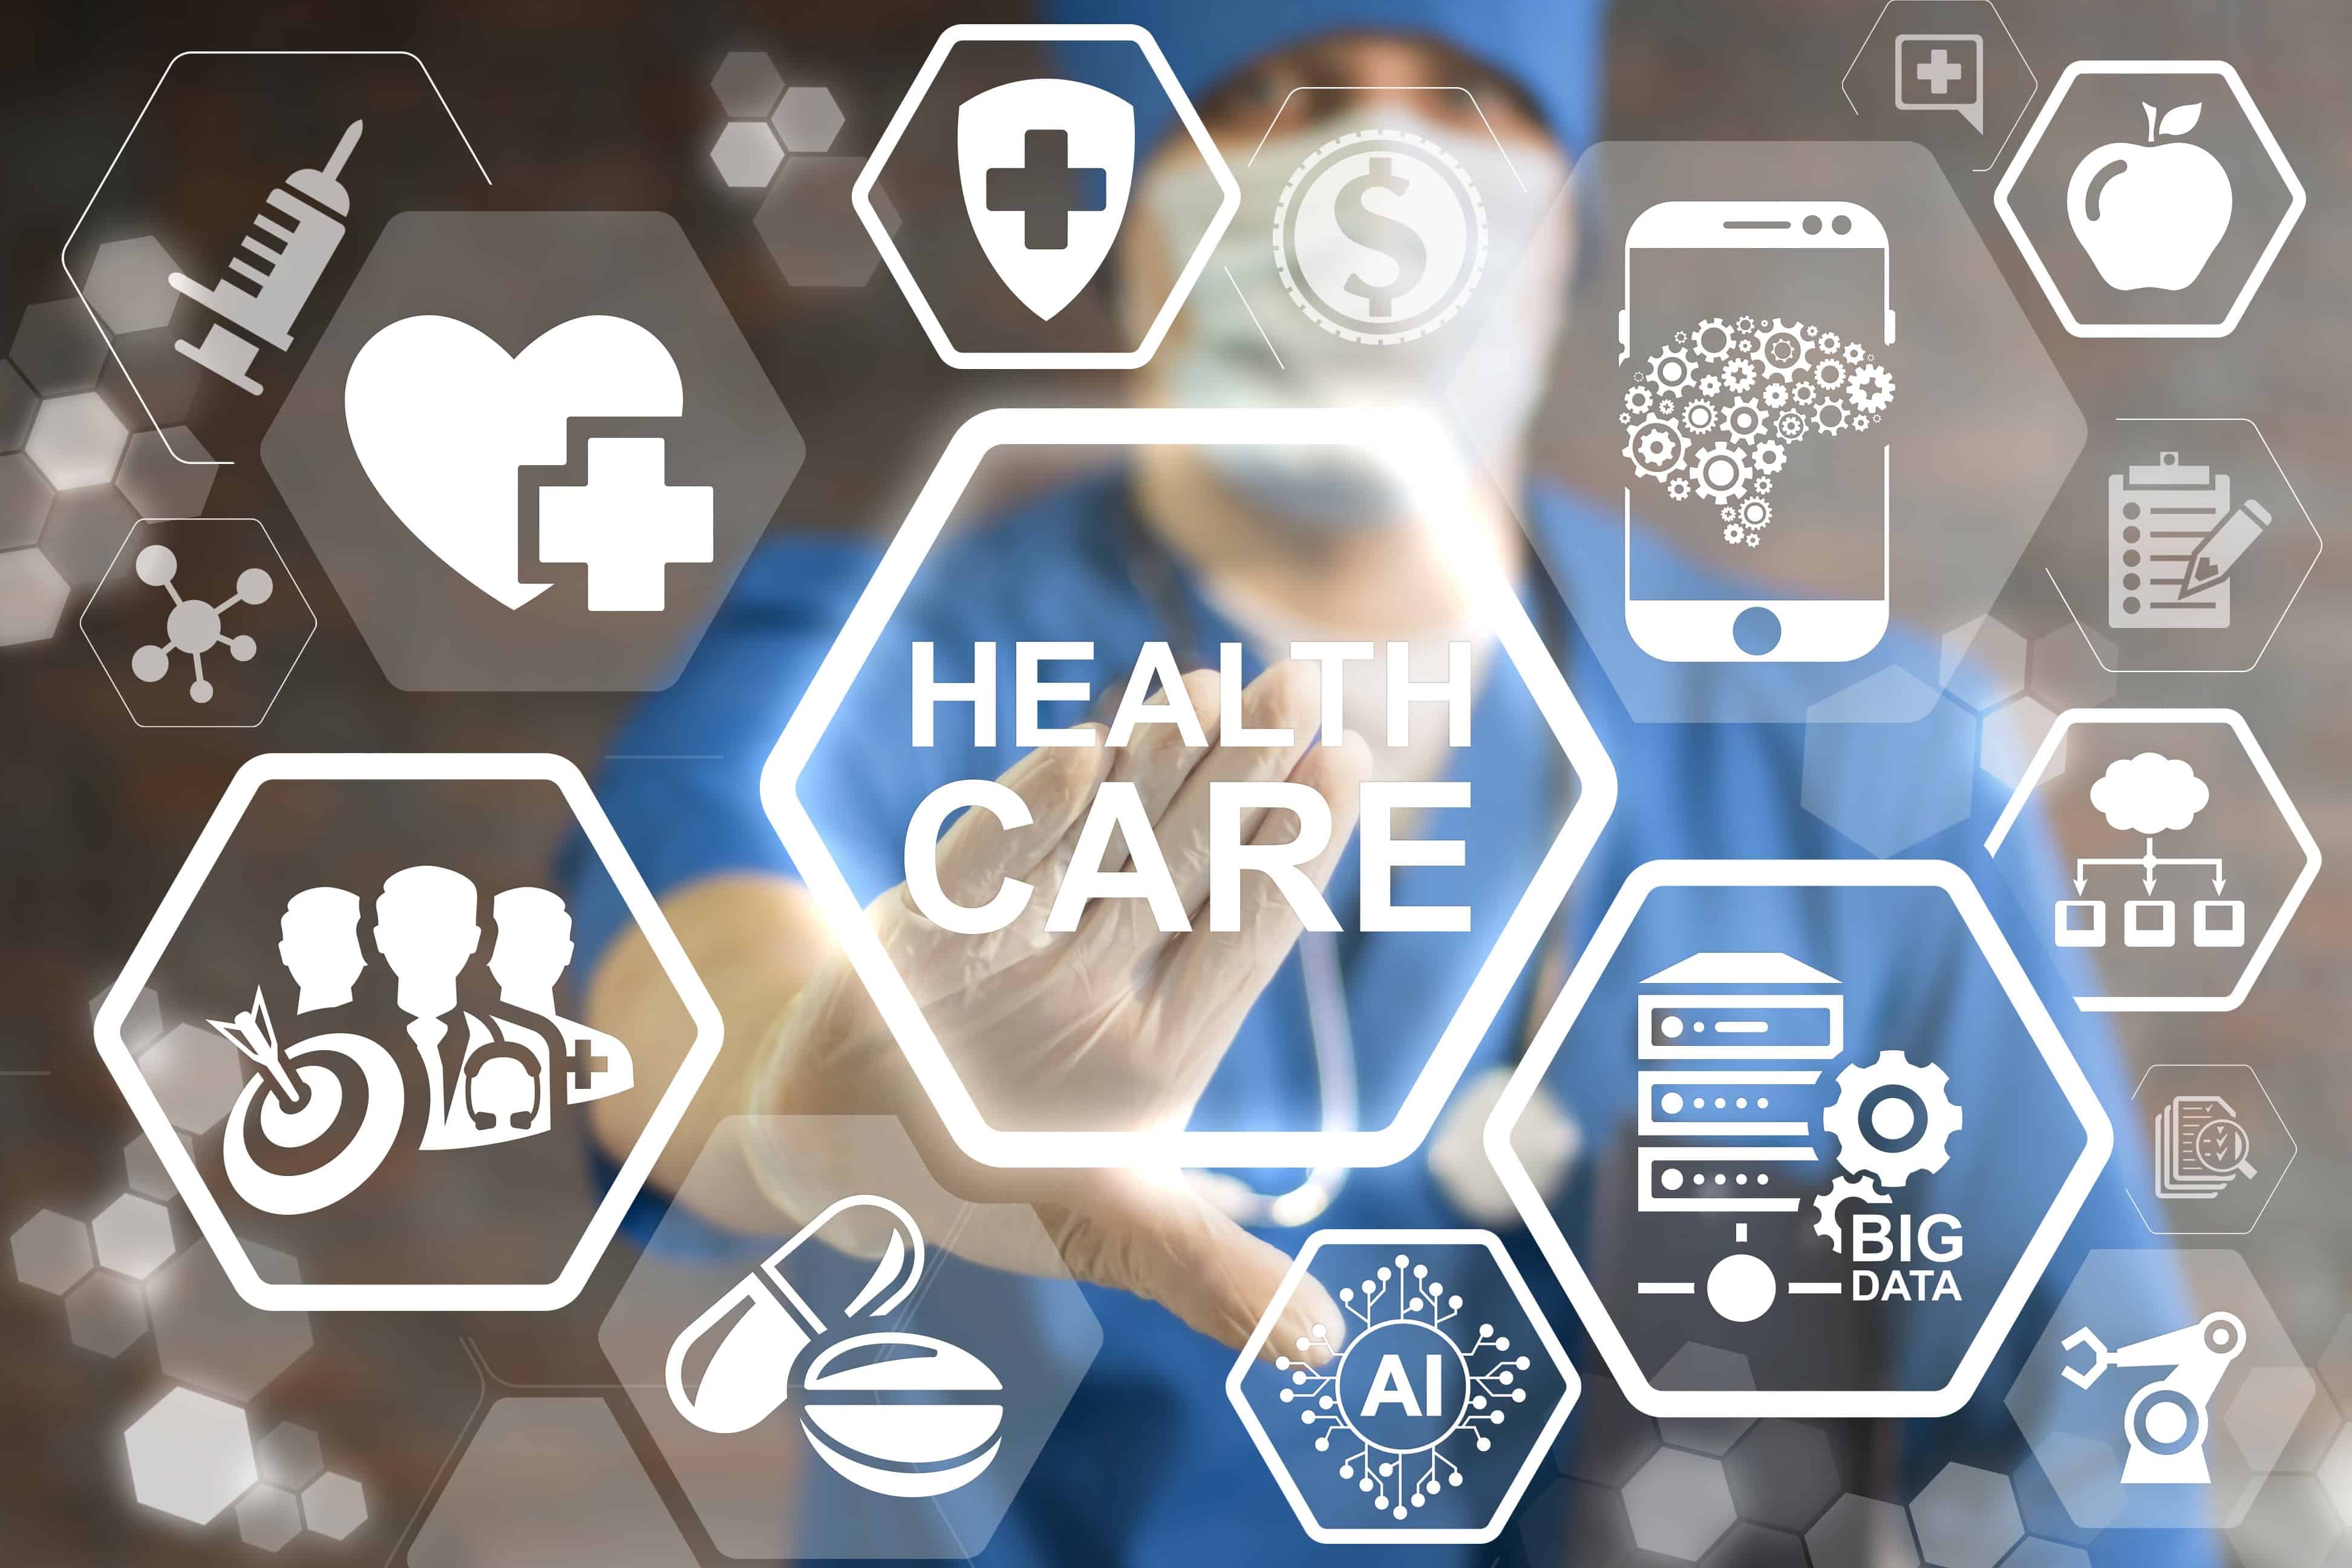 The Future of Emergency Medicine: 6 Technologies That Make